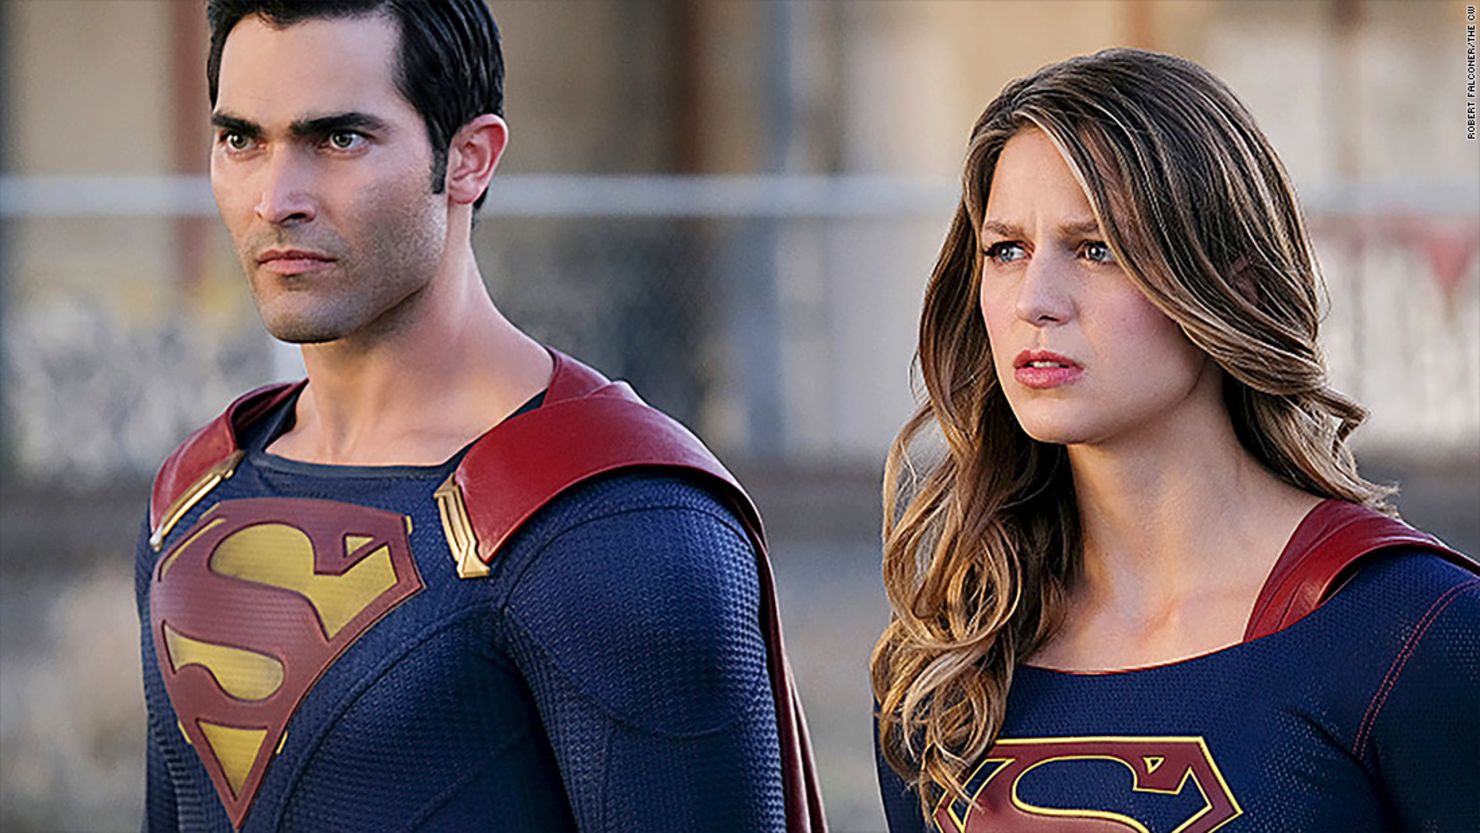 Supergirl Season 2 shows how DC differs from Marvel | CNN